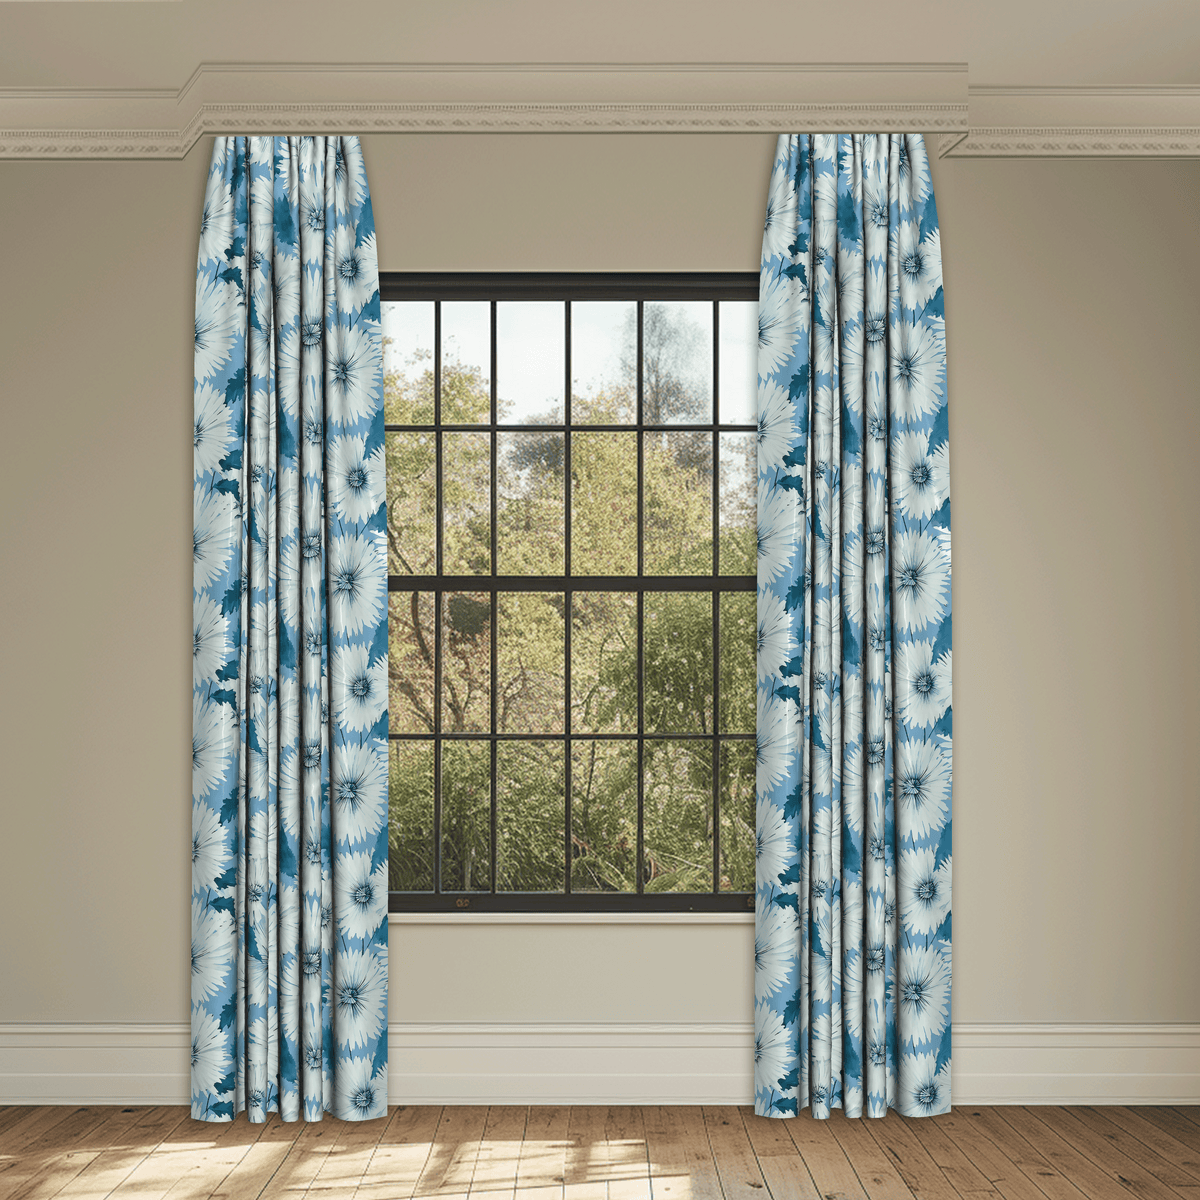 Shiloh Periwinkle Made to Measure Curtains